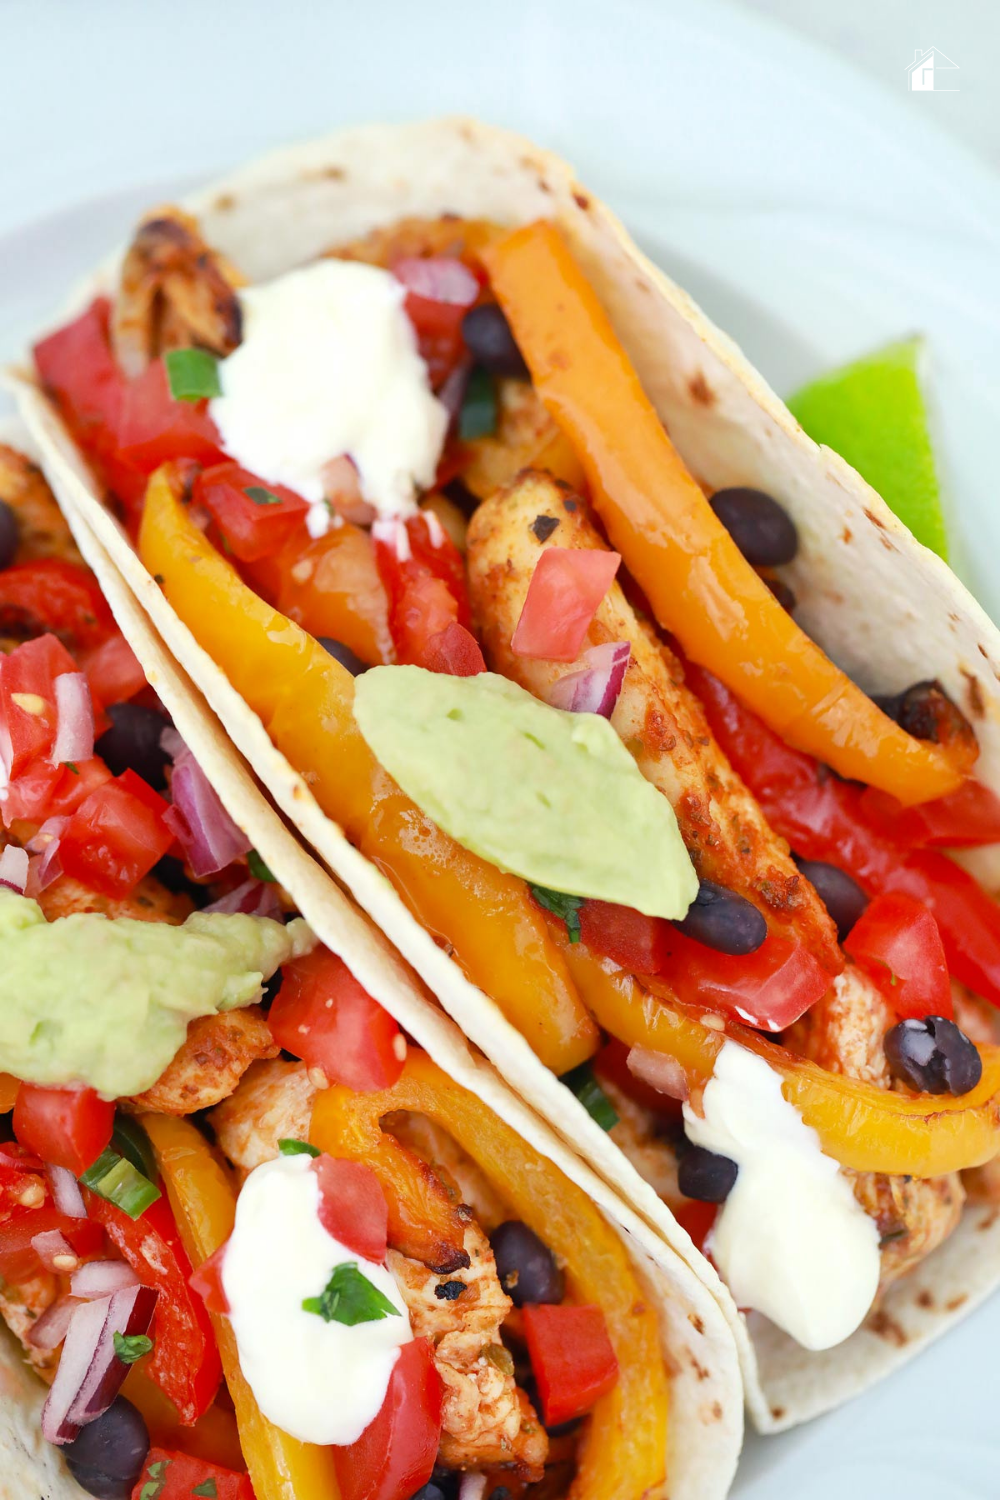 Do you love Mexican food? Check out this amazing air fryer chicken fajita recipe! It's perfect for a quick and easy meal. via @mystayathome